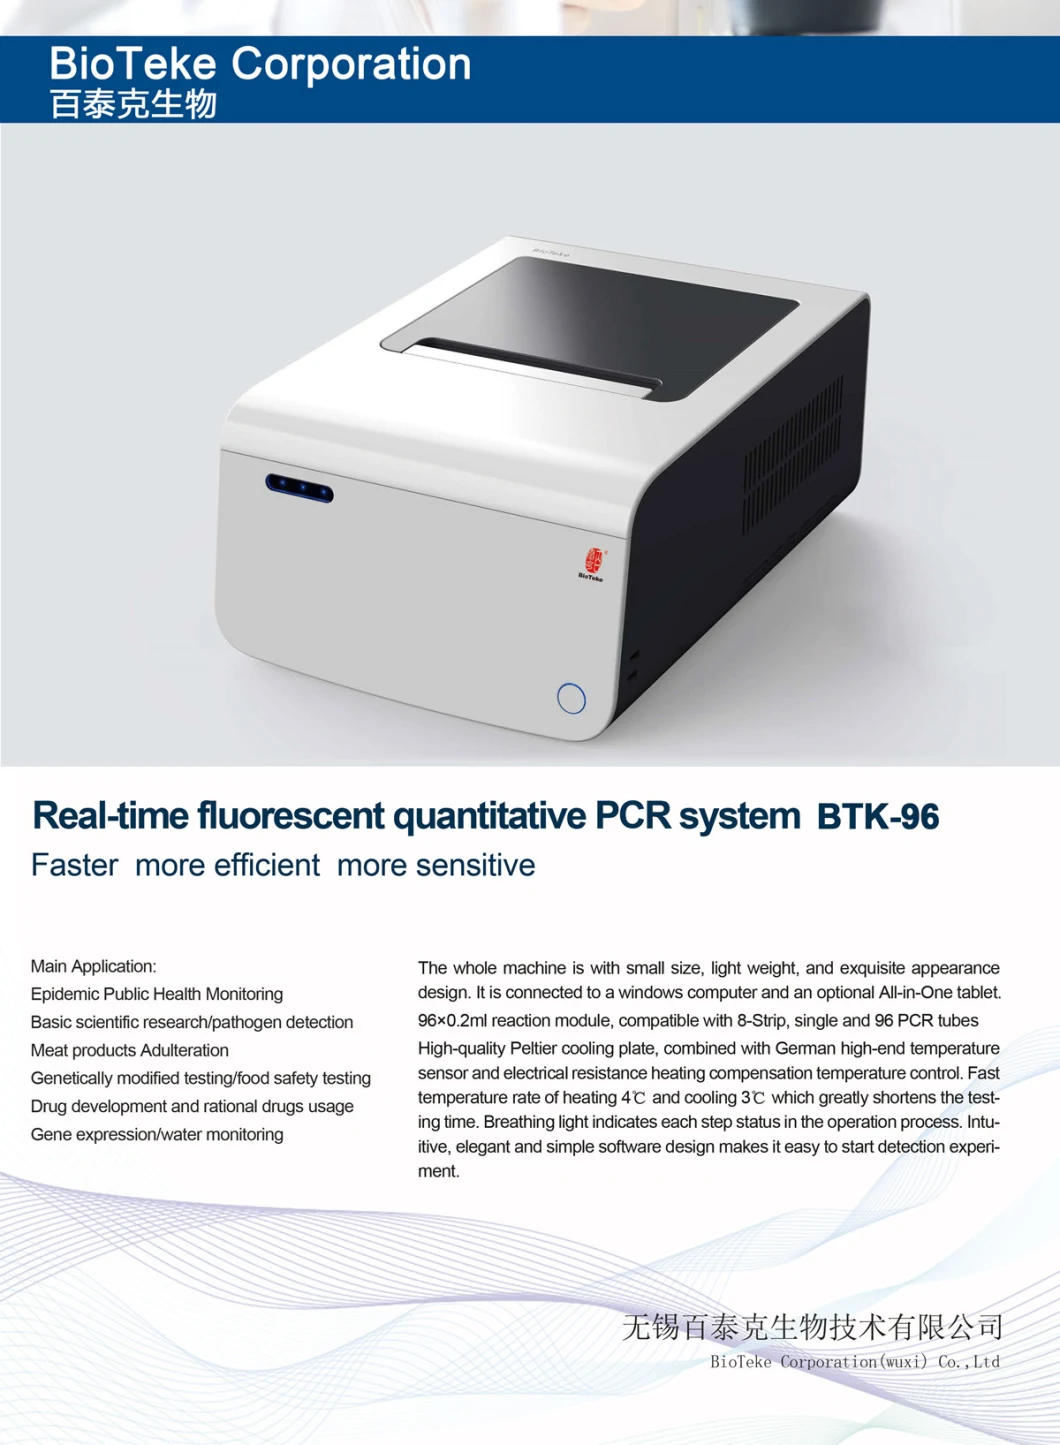 PCR Test Real Time Medical Diagnostic/Nucleic Acid Extractor Fluorescence